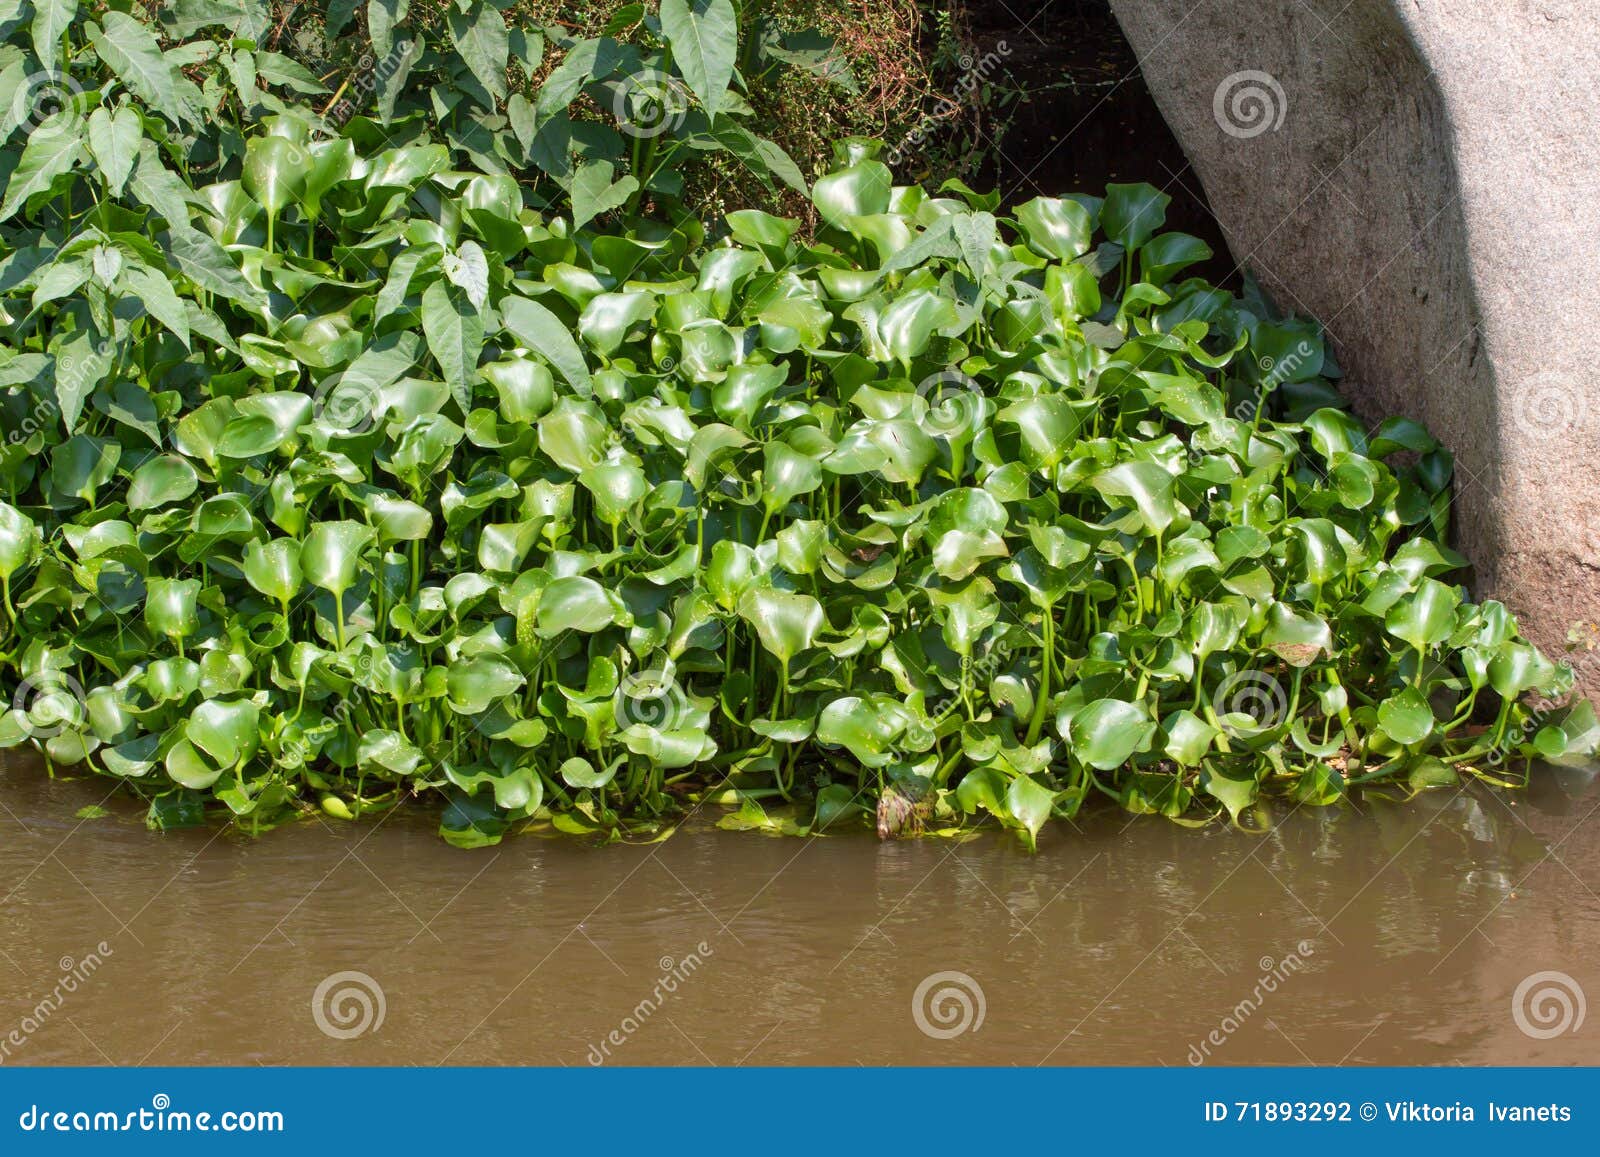 eichornia crassipes in dirty river, india, andaman islands